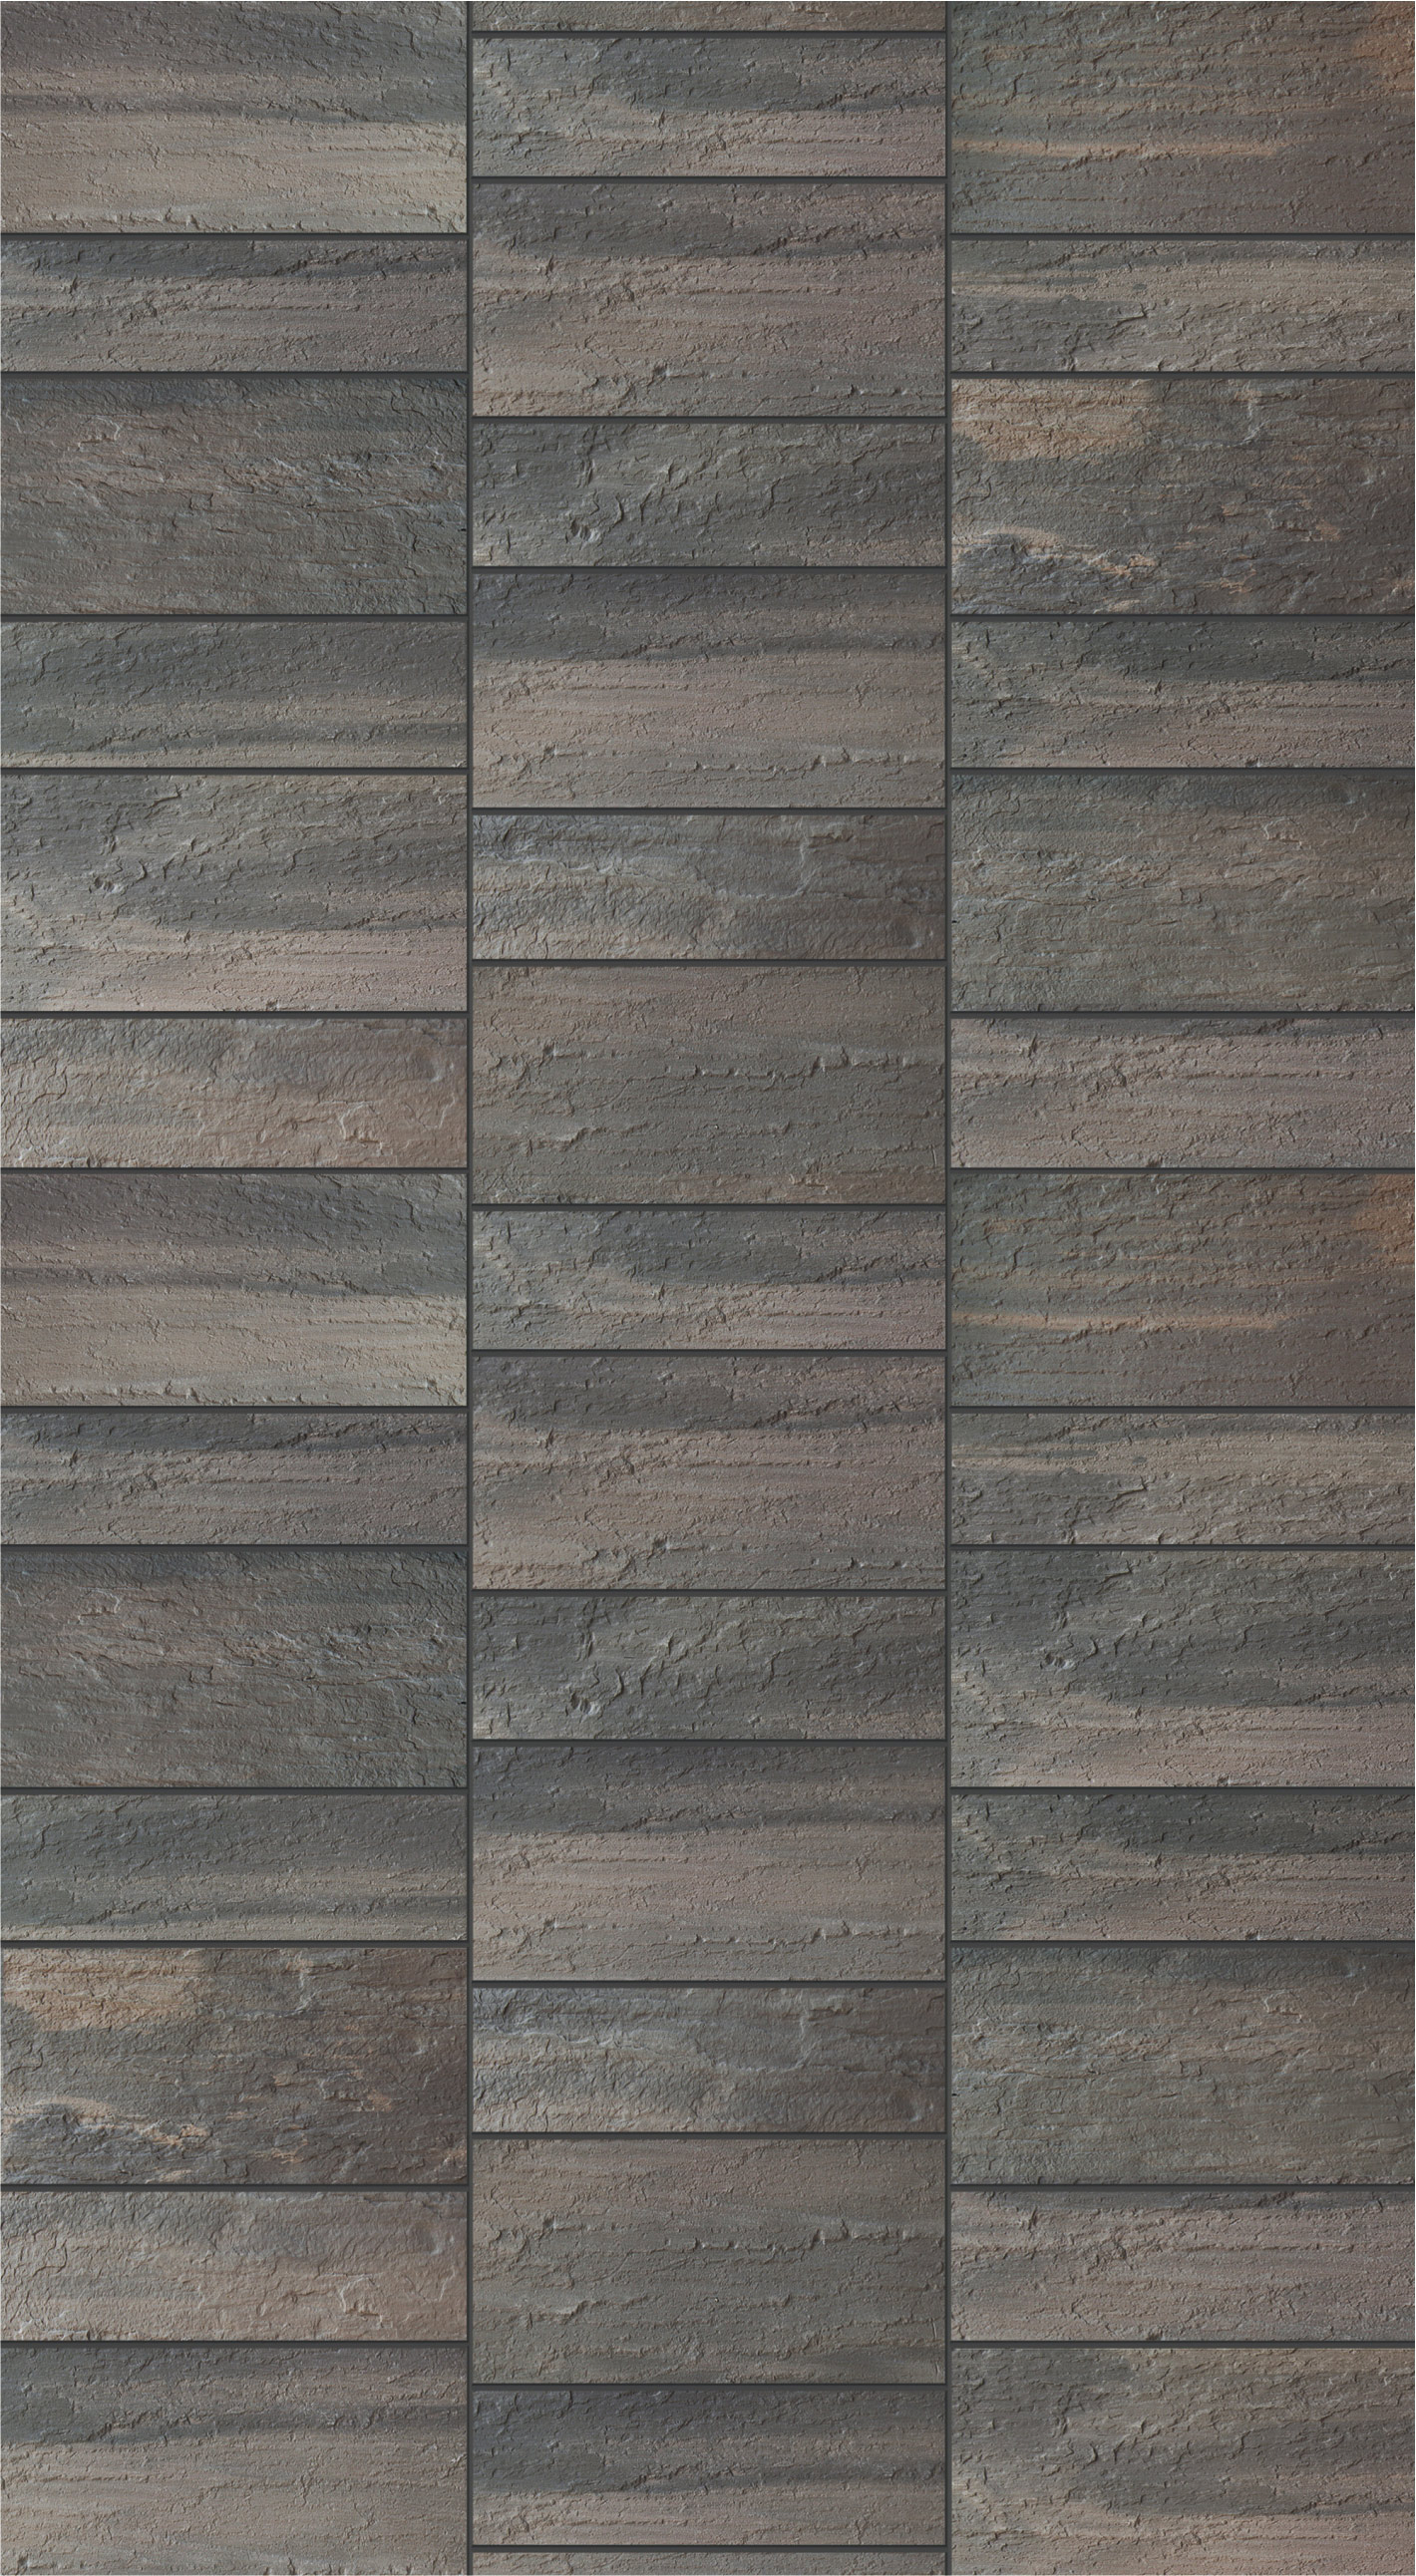 Oasis-Stone-combination-of-two-size-tiles-600x300-_-600x150-mm-with-seam-8mm-of-043-grout-dark